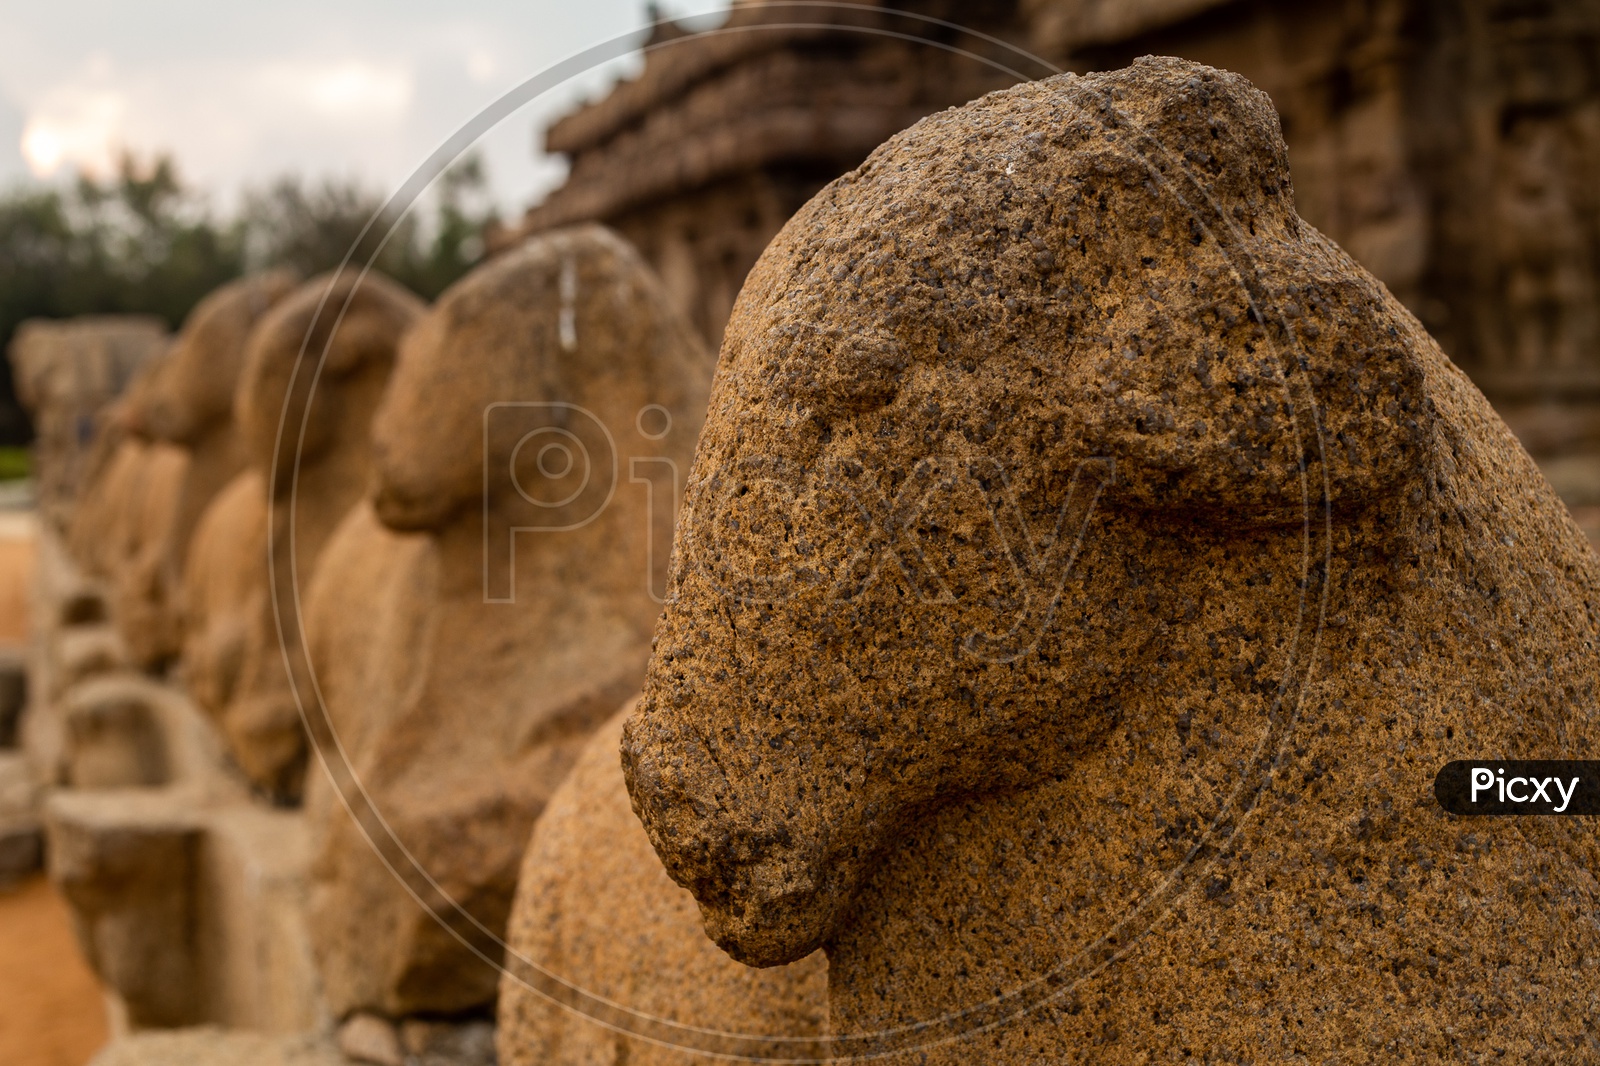 Nandi Statues Aroung the Temple wall of Shore temple